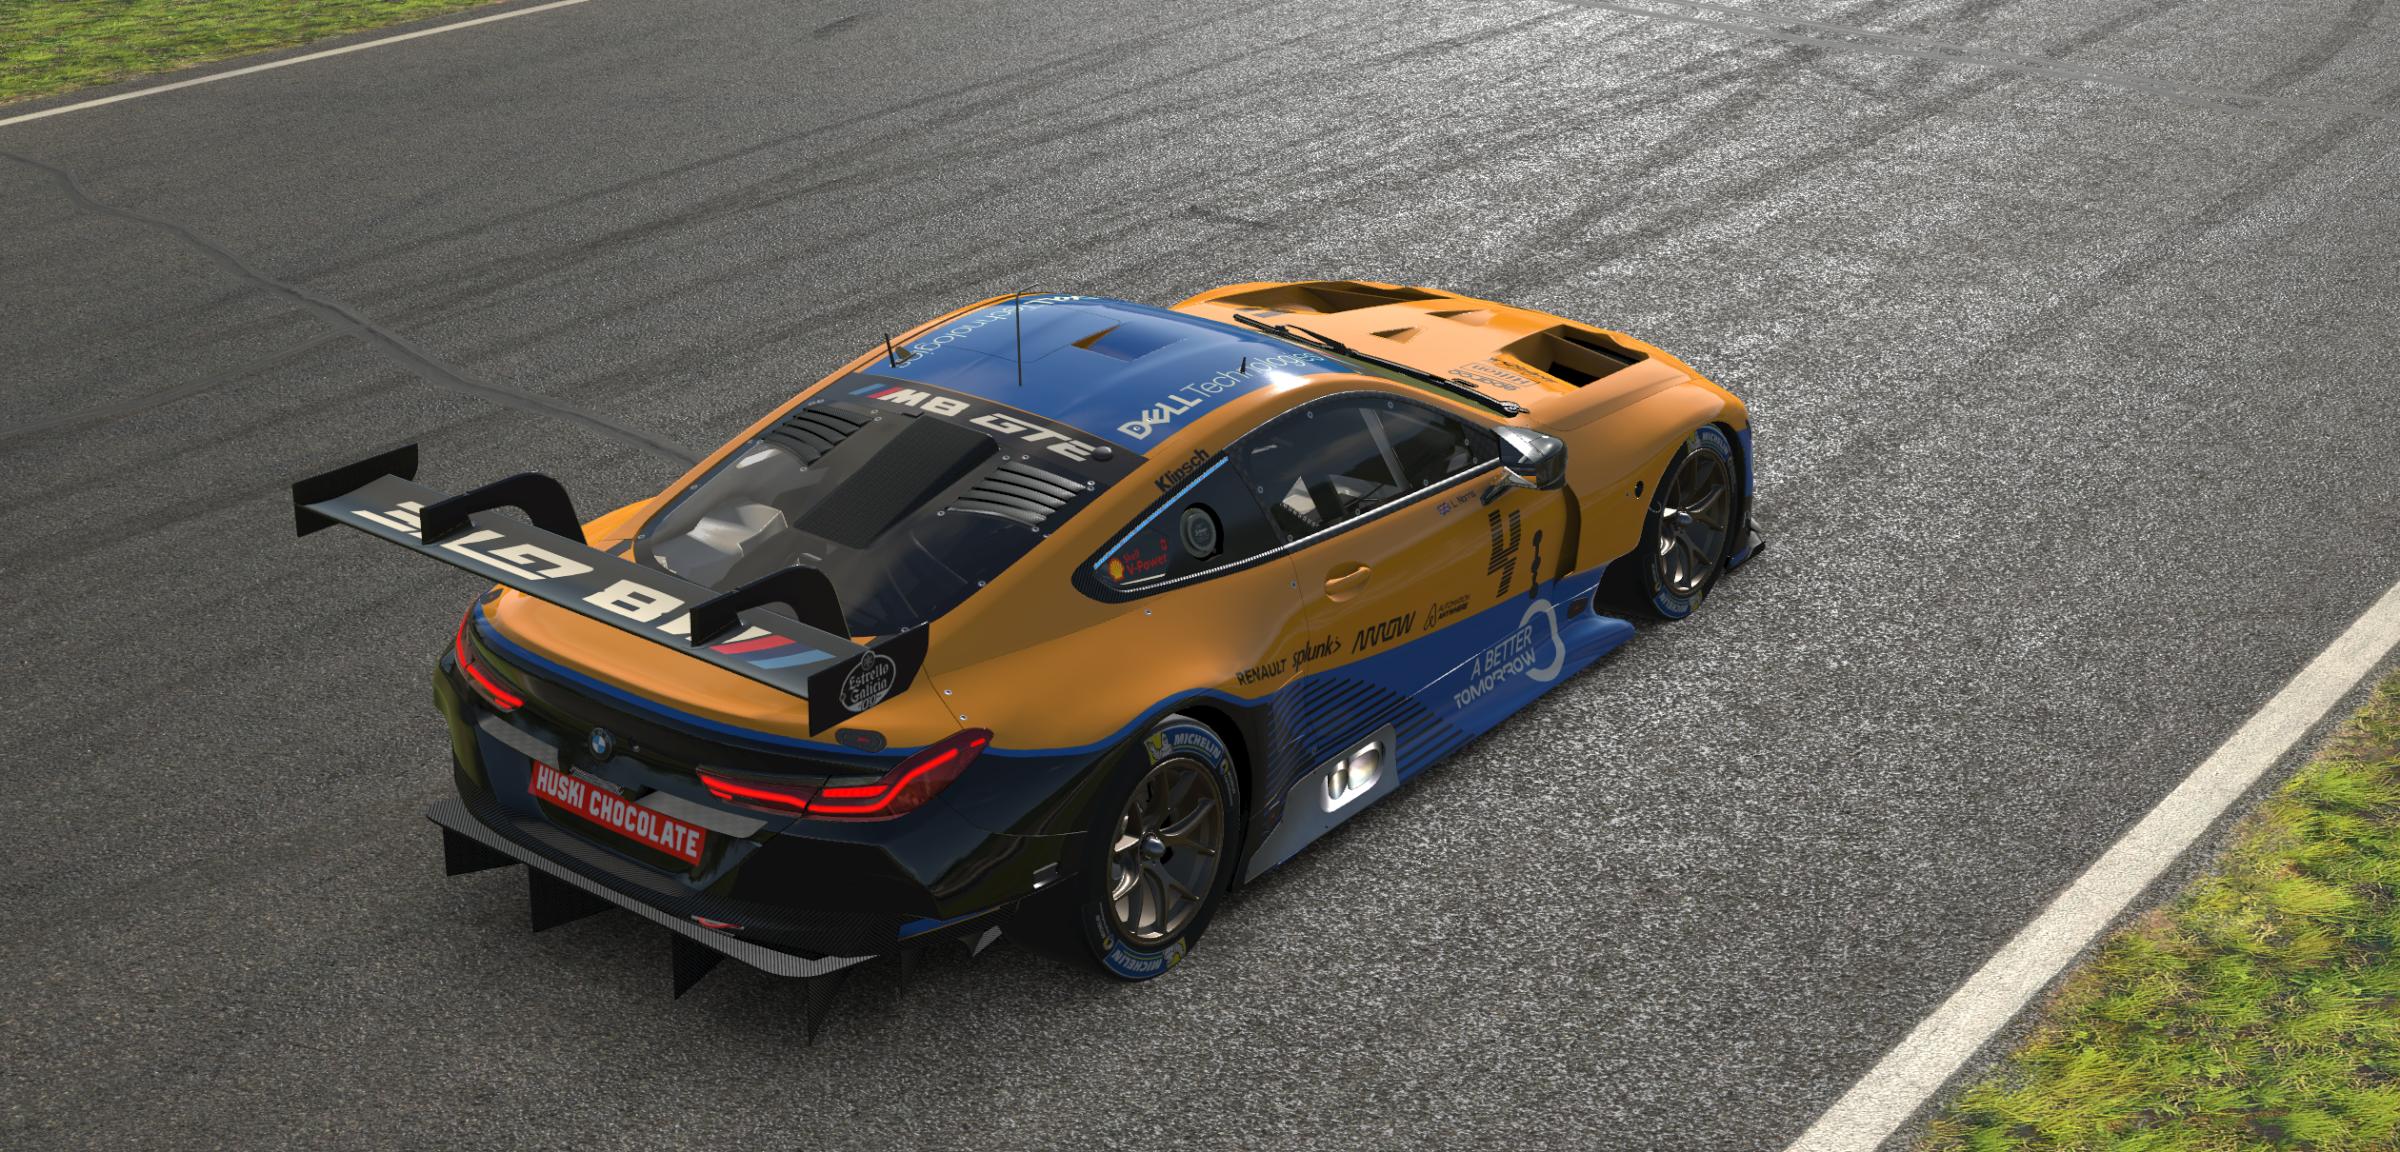 Preview of McLaren F1 Lando Norris Livery - BMW M8 GTE by Gino Kelleners